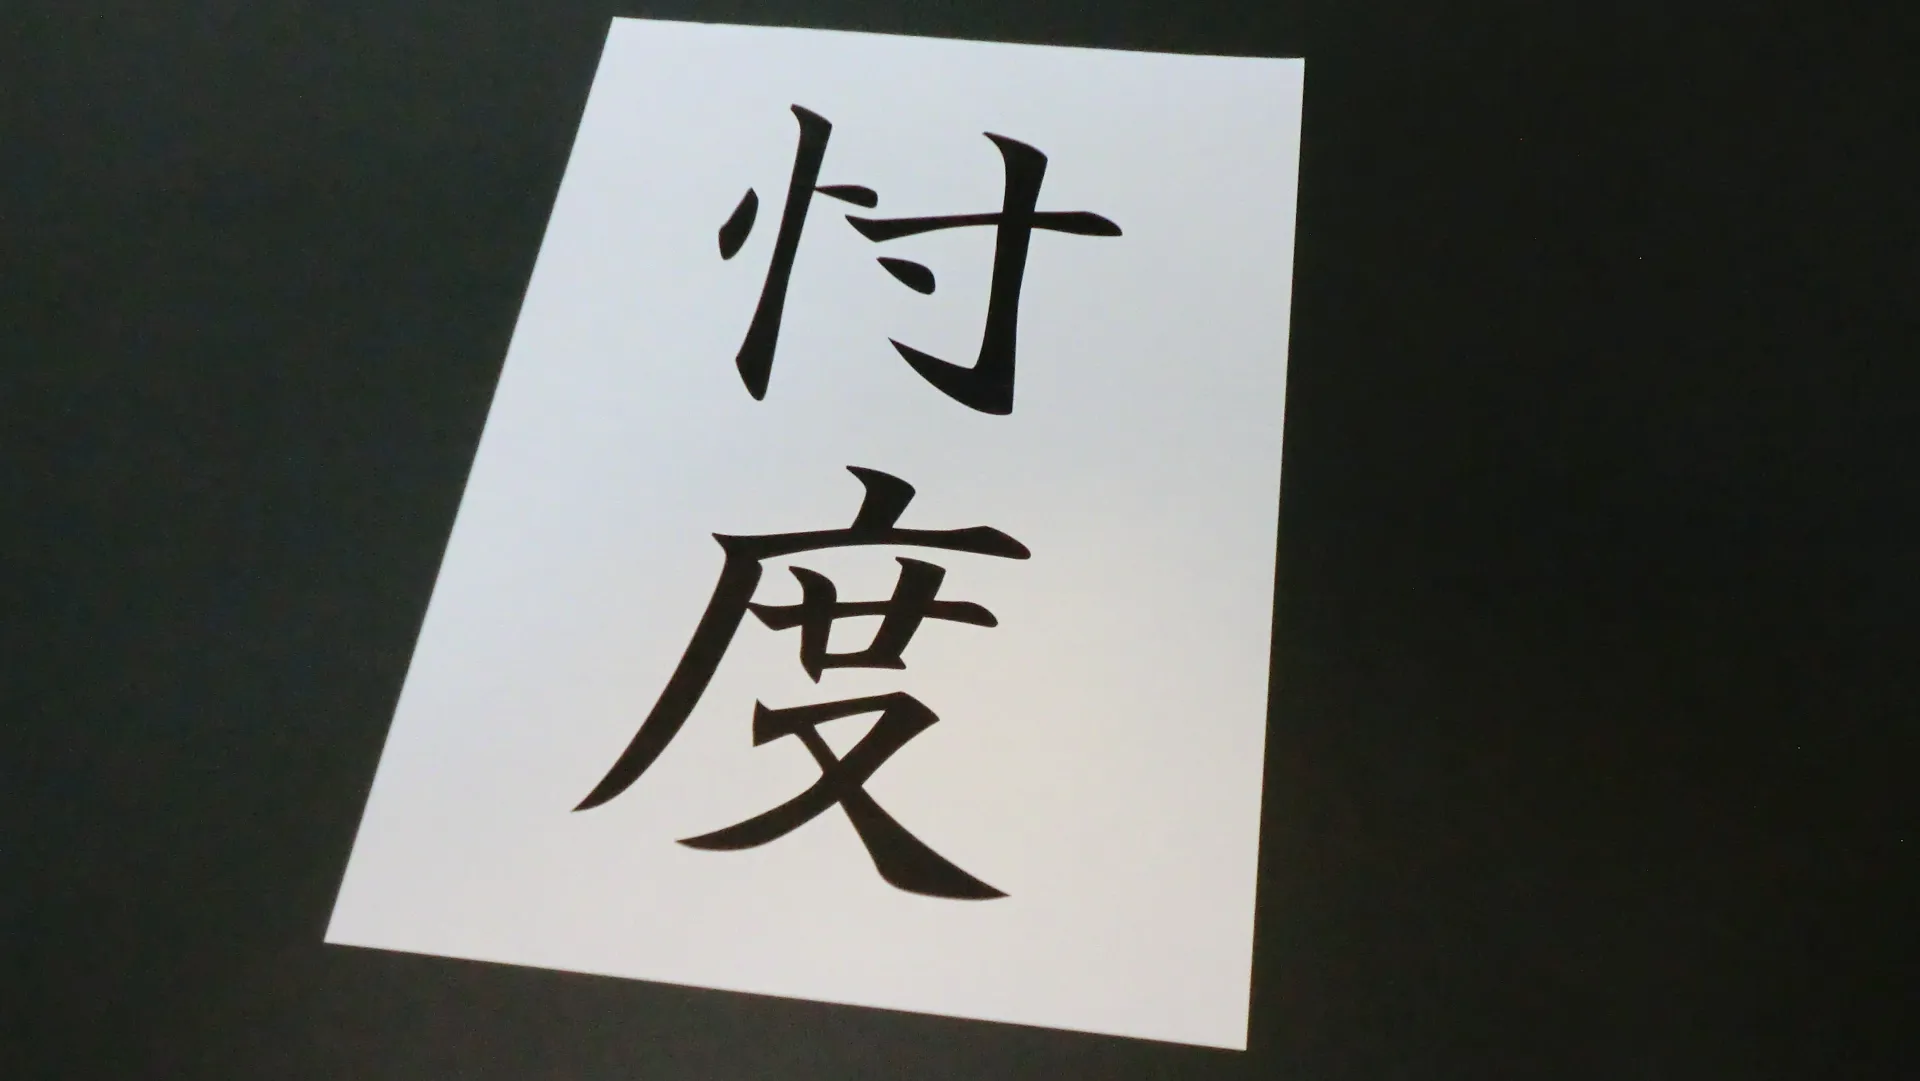 A piece of paper with "忖度" written on it with a feeling